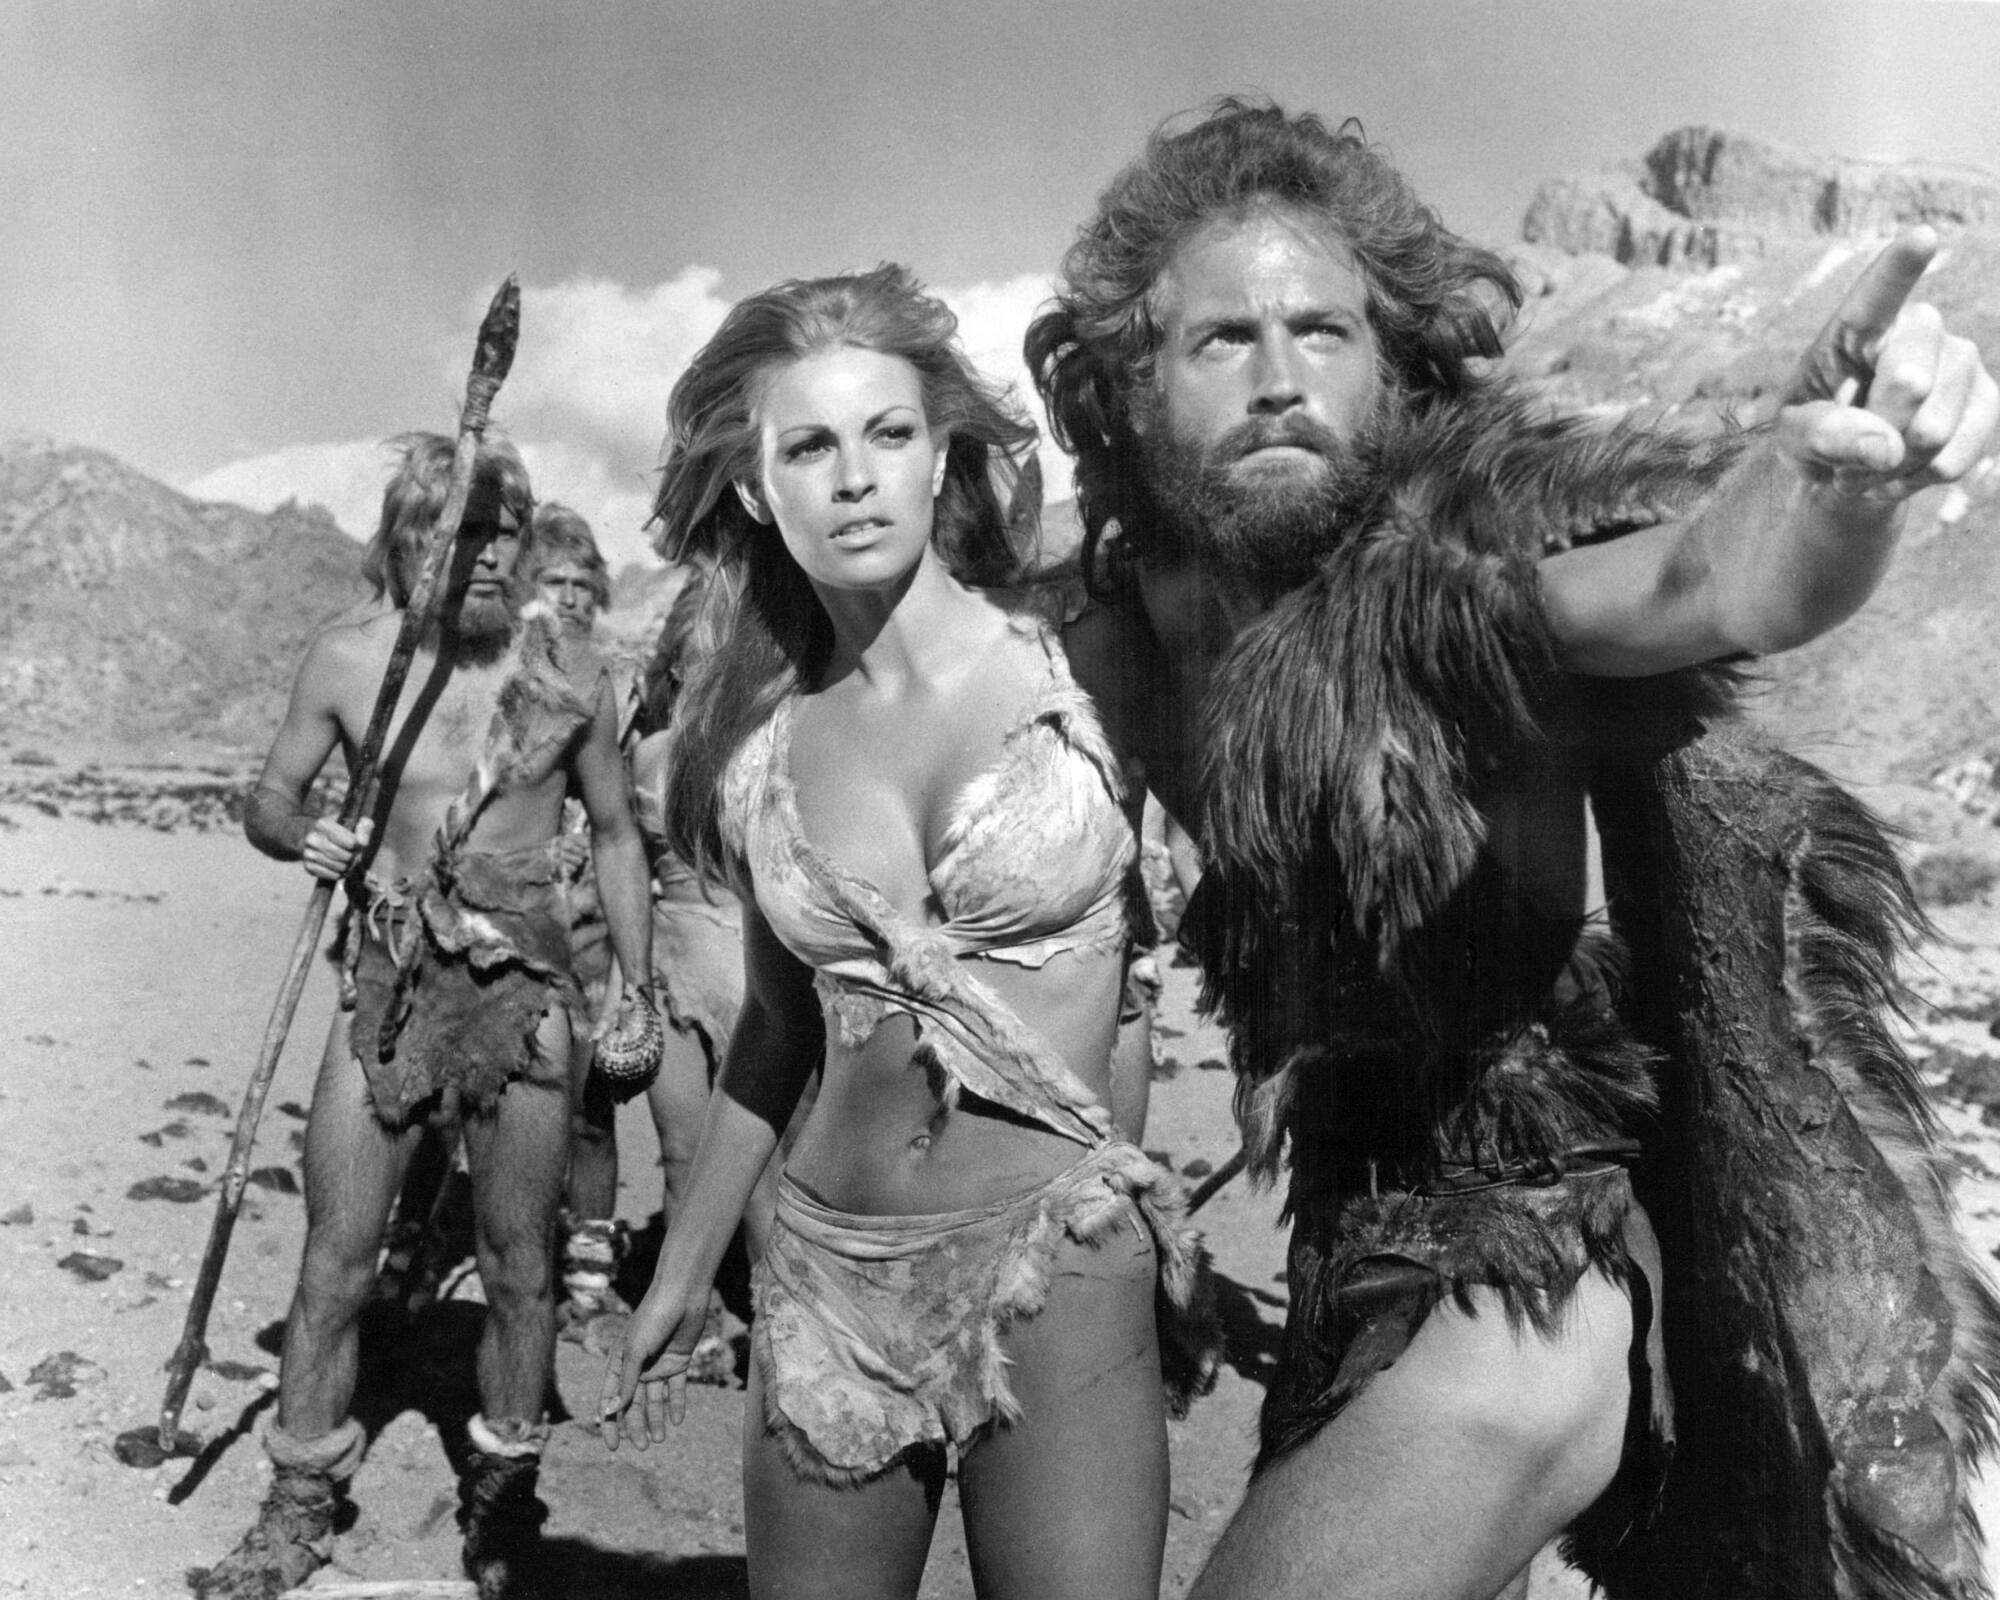 American actress Raquel Welch as Loana, and English actor John Richardson as Turak, in 'One Million Years BC', 